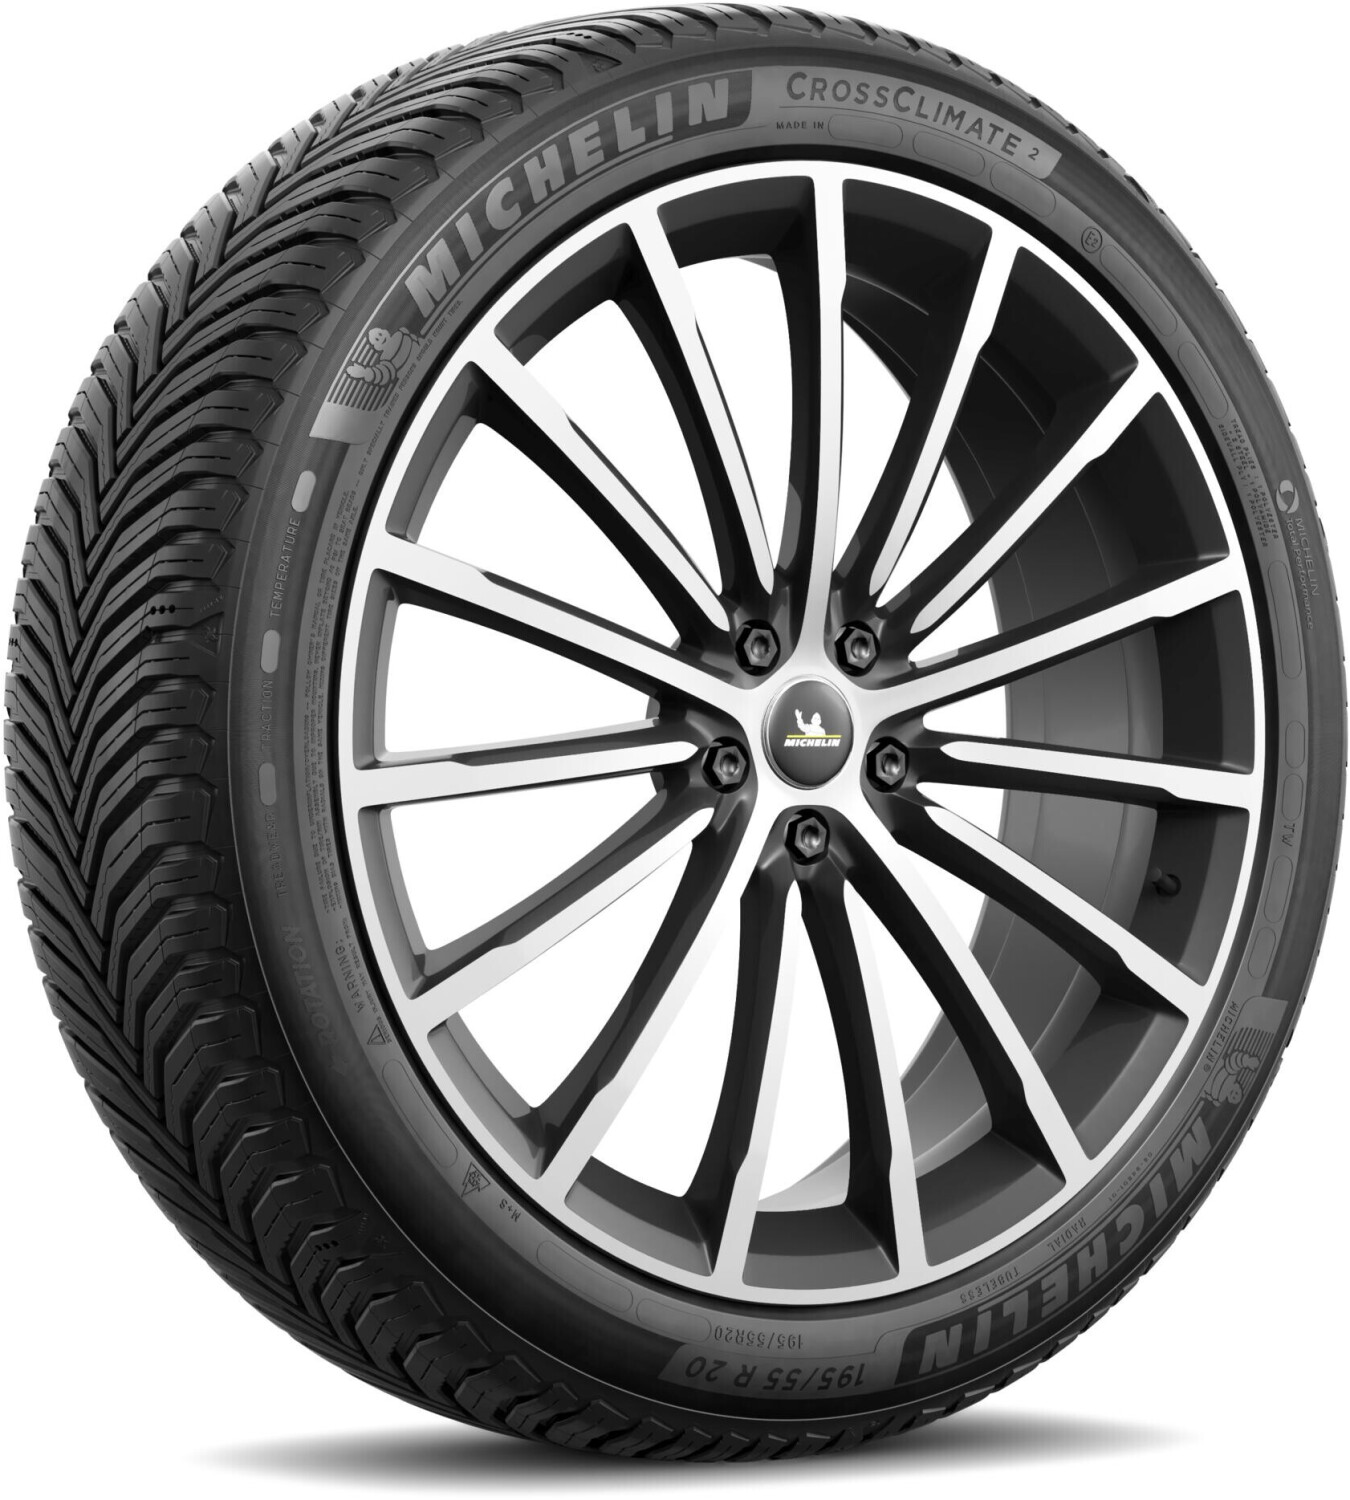 michelin-crossclimate-2-prices-how-do-you-price-a-switches